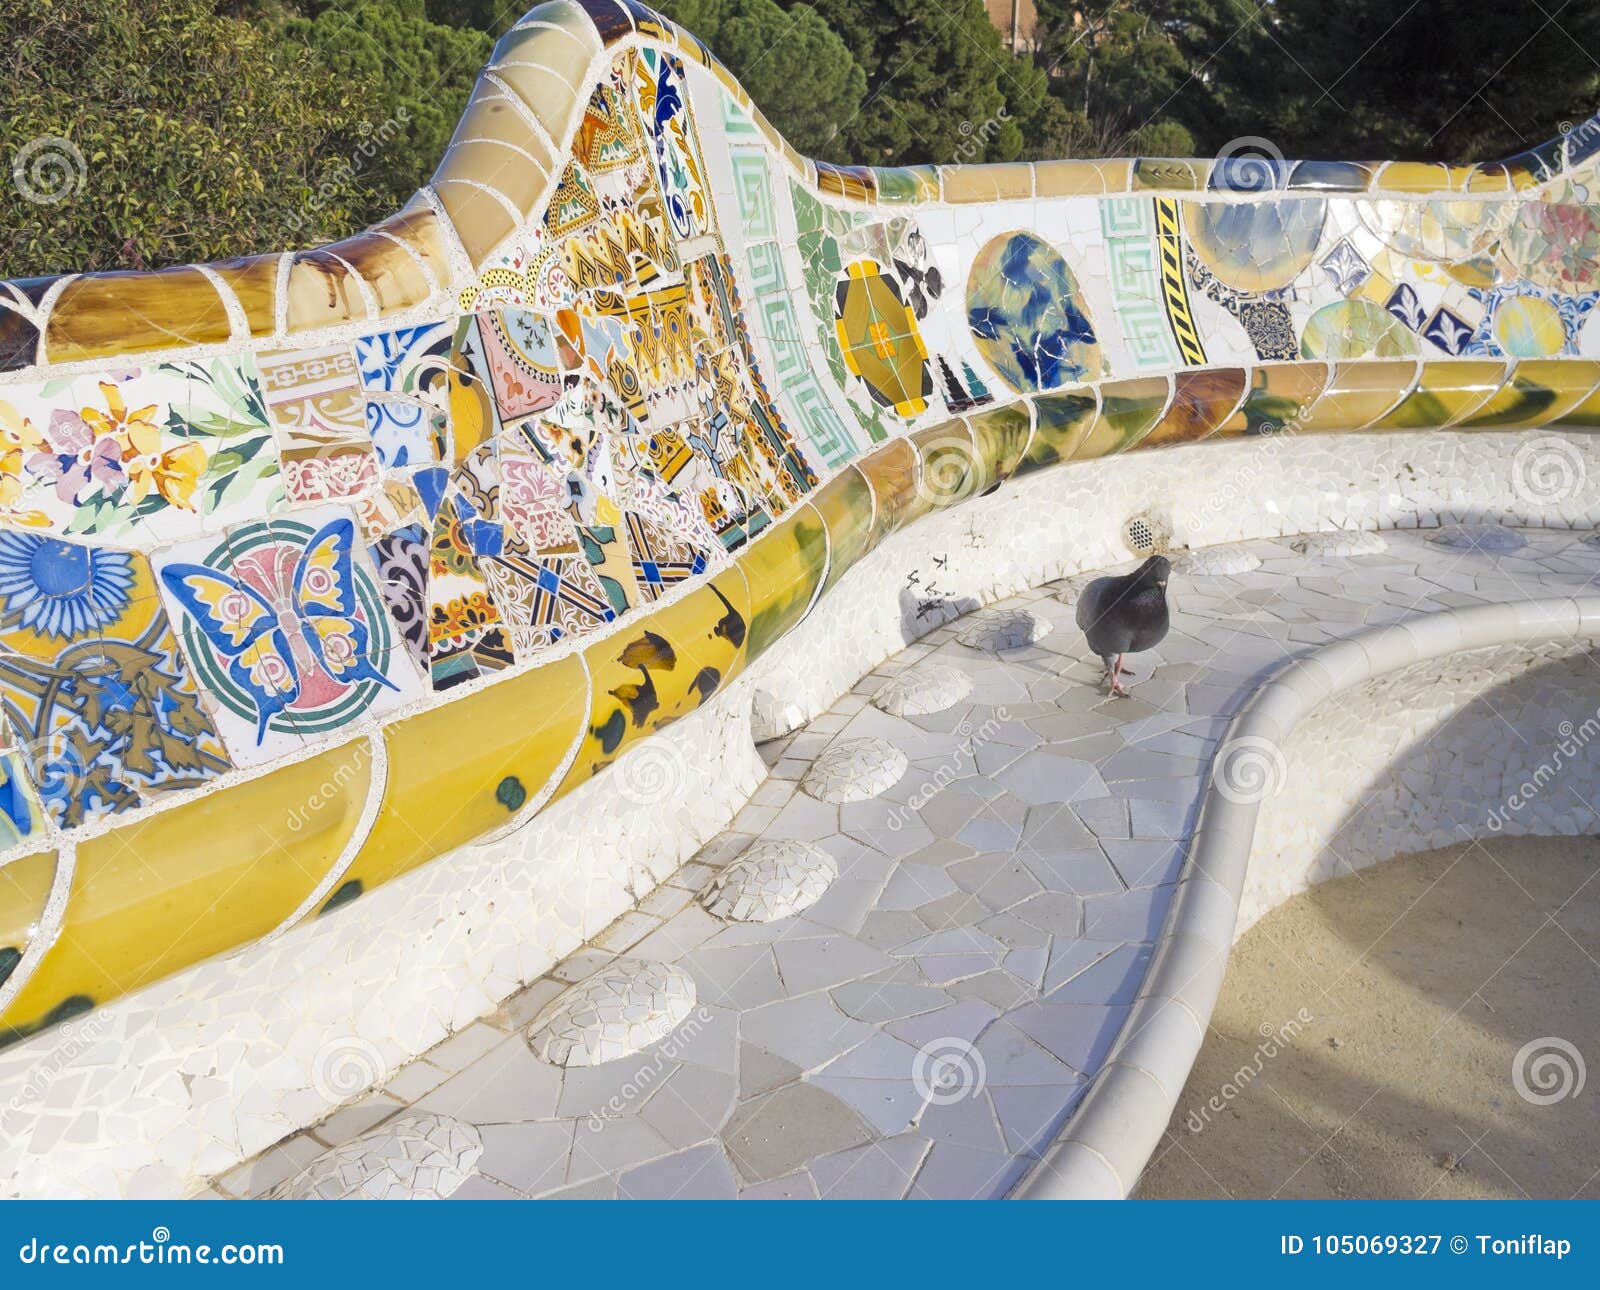 a mosaic of park guell ed by antonio gaudi. barcelona